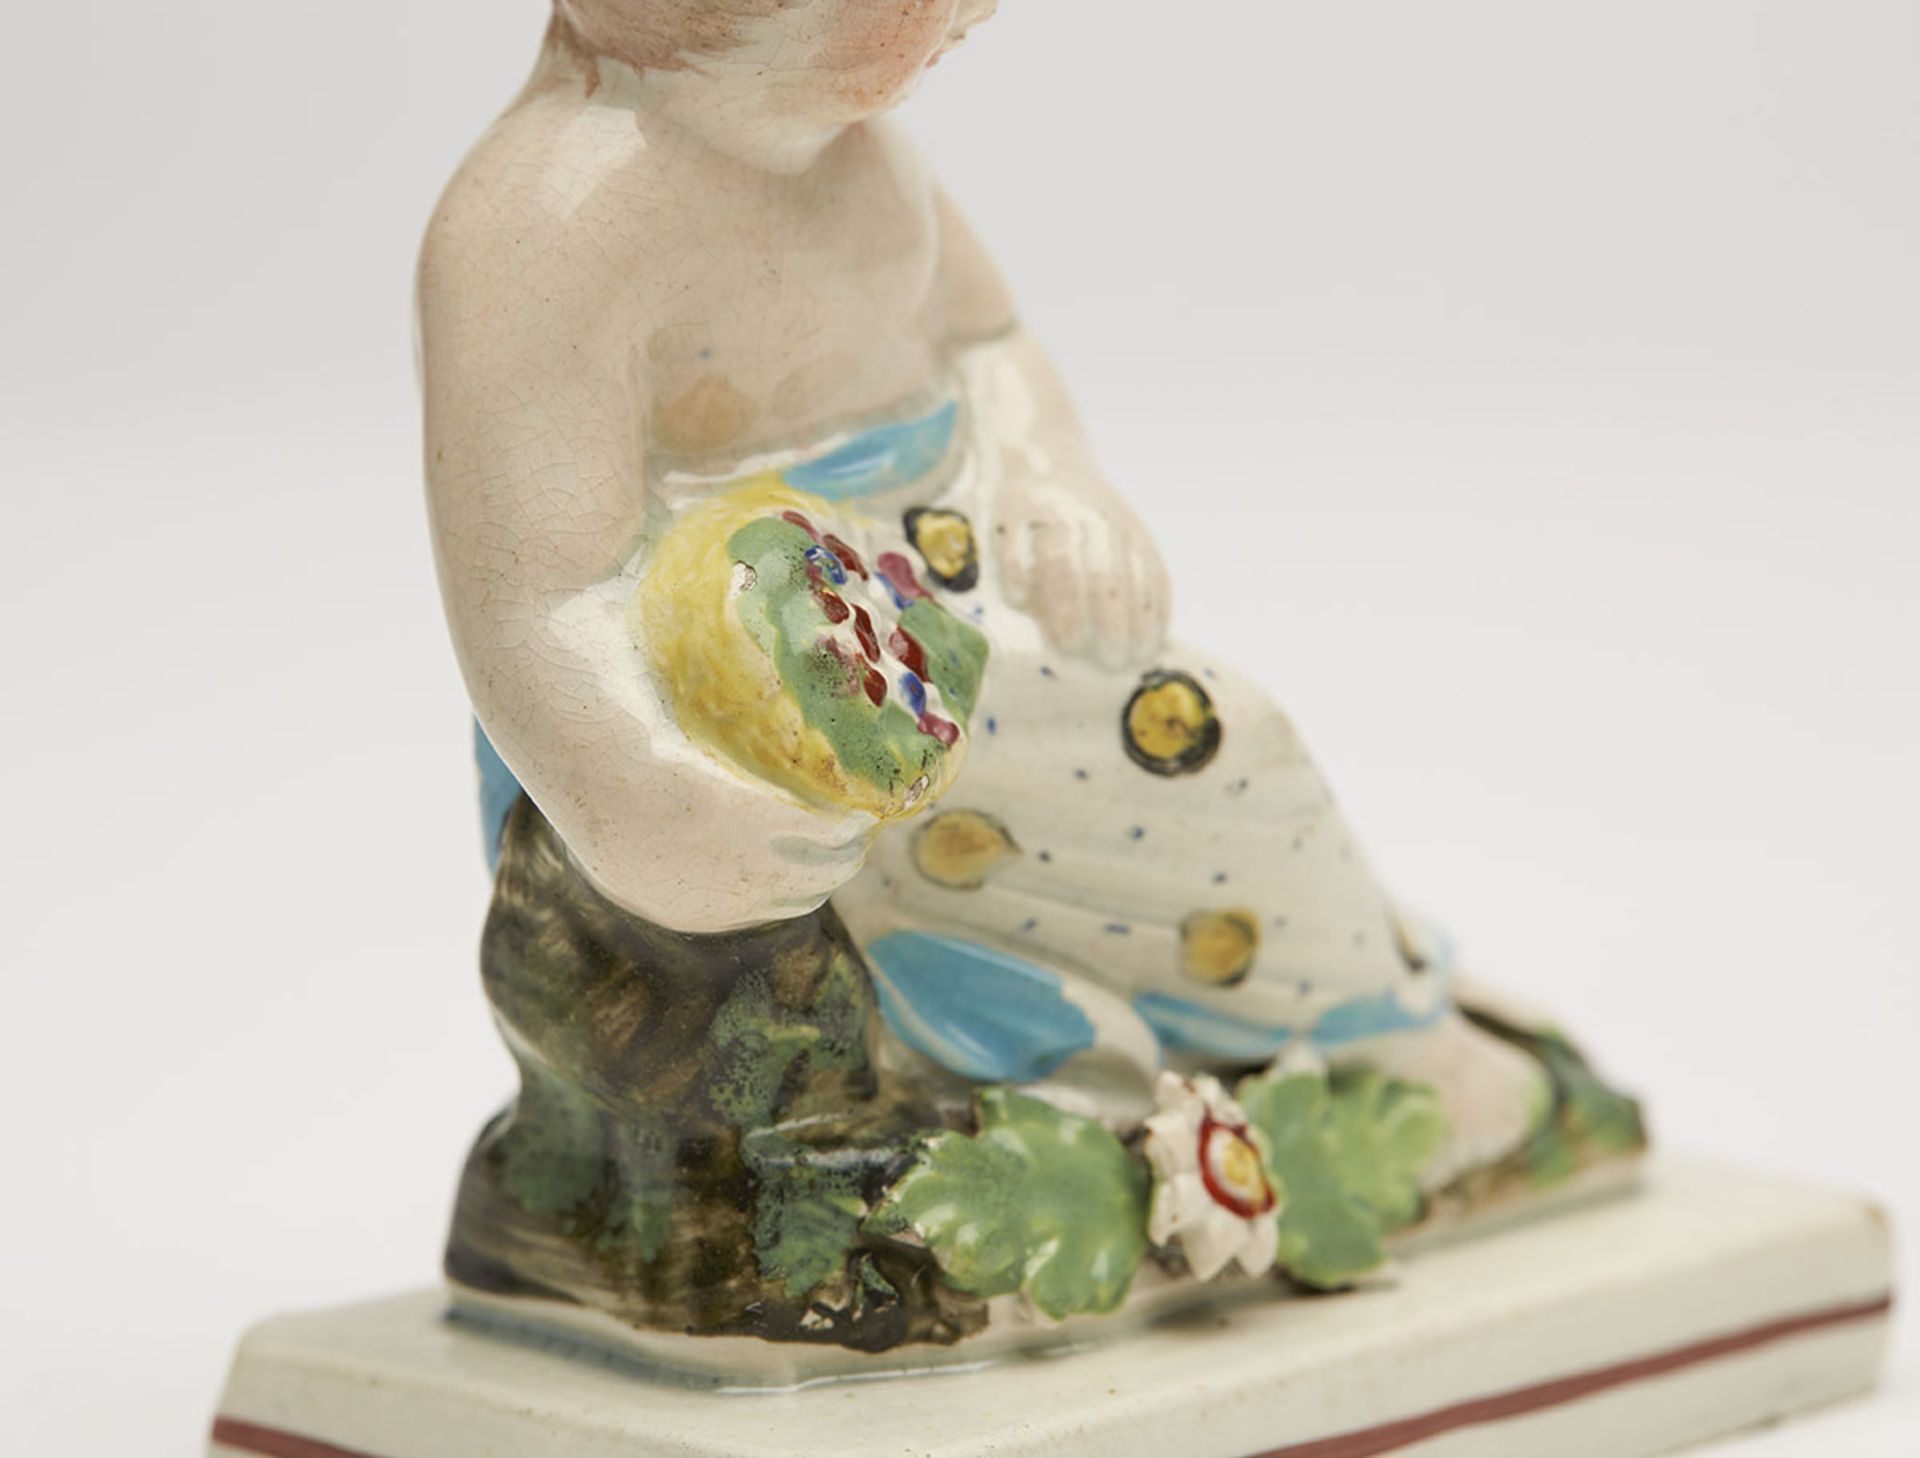 ANTIQUE STAFFORDSHIRE PEARLWARE RECLINING LADY FIGURE c1800 - Image 4 of 8